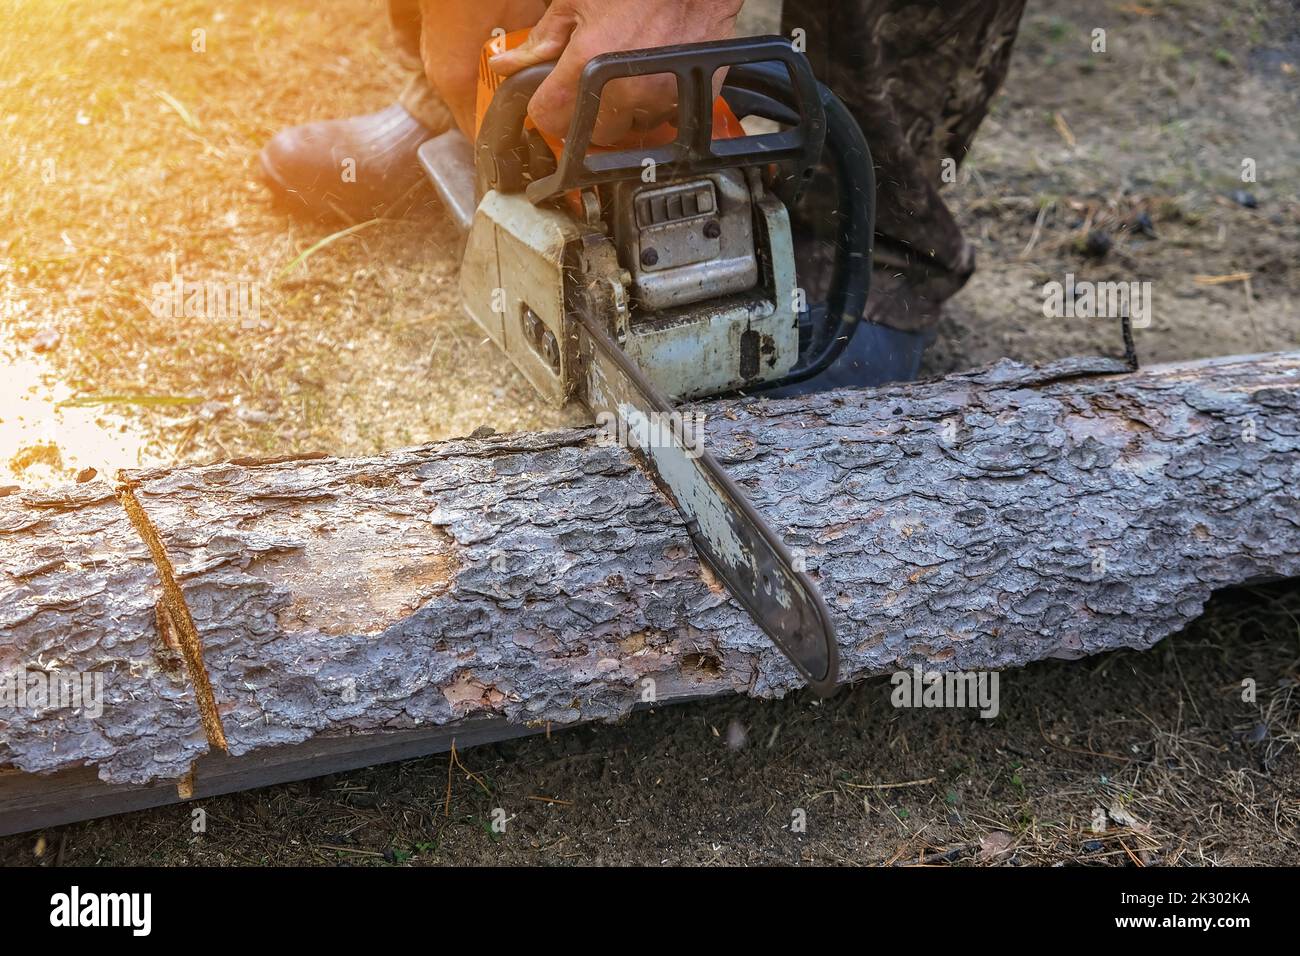 A woodcutter saws a dry tree for firewood with a chainsaw. A man is harvesting logs in the forest. Stock Photo